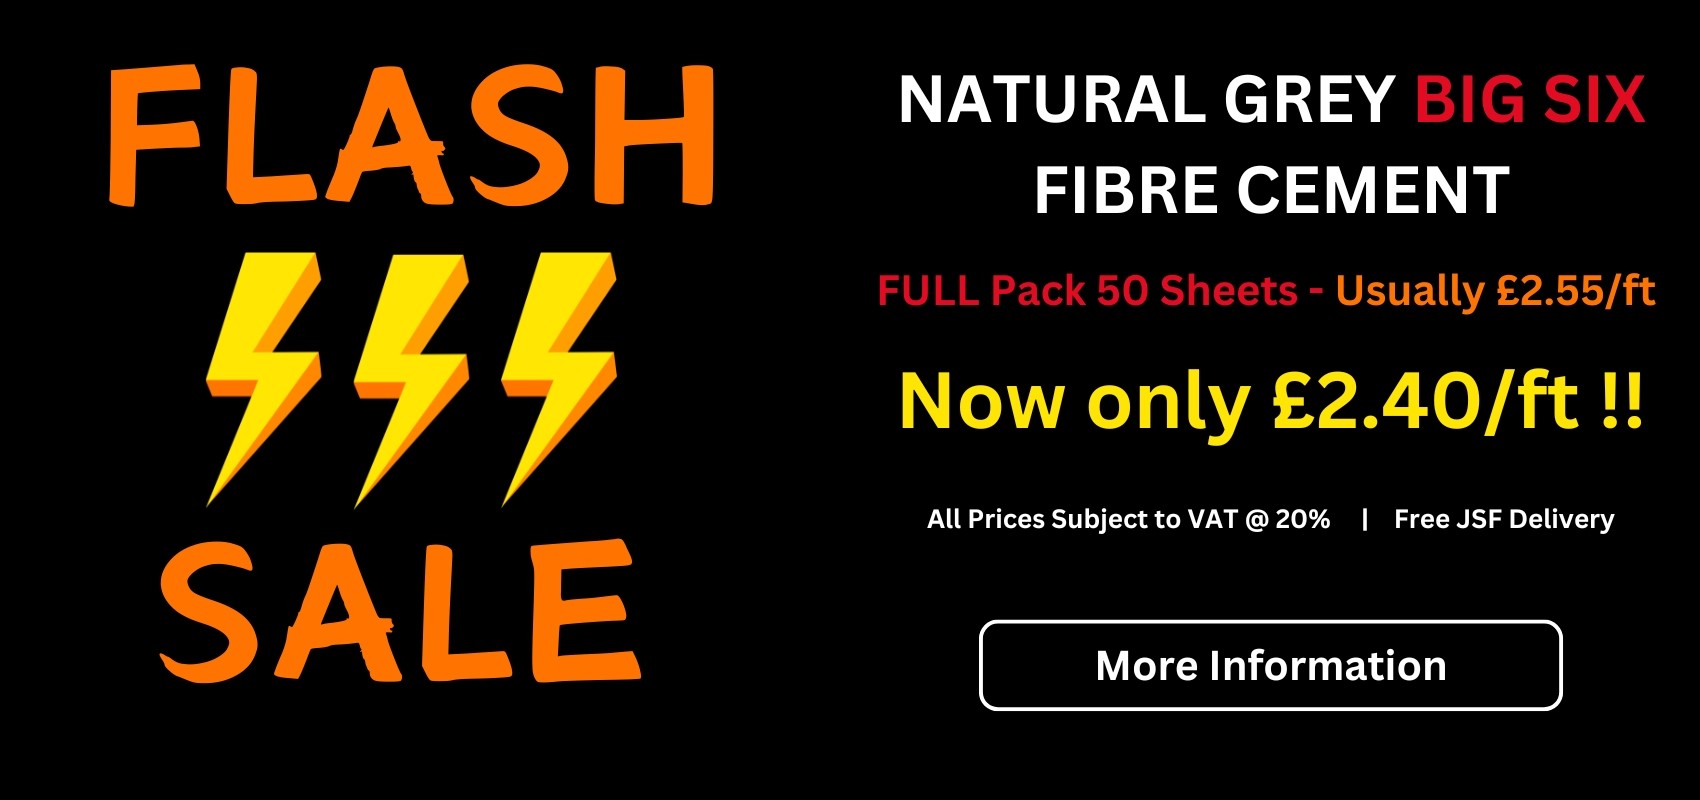 Fibre cement flash sale - on 50 sheets or more